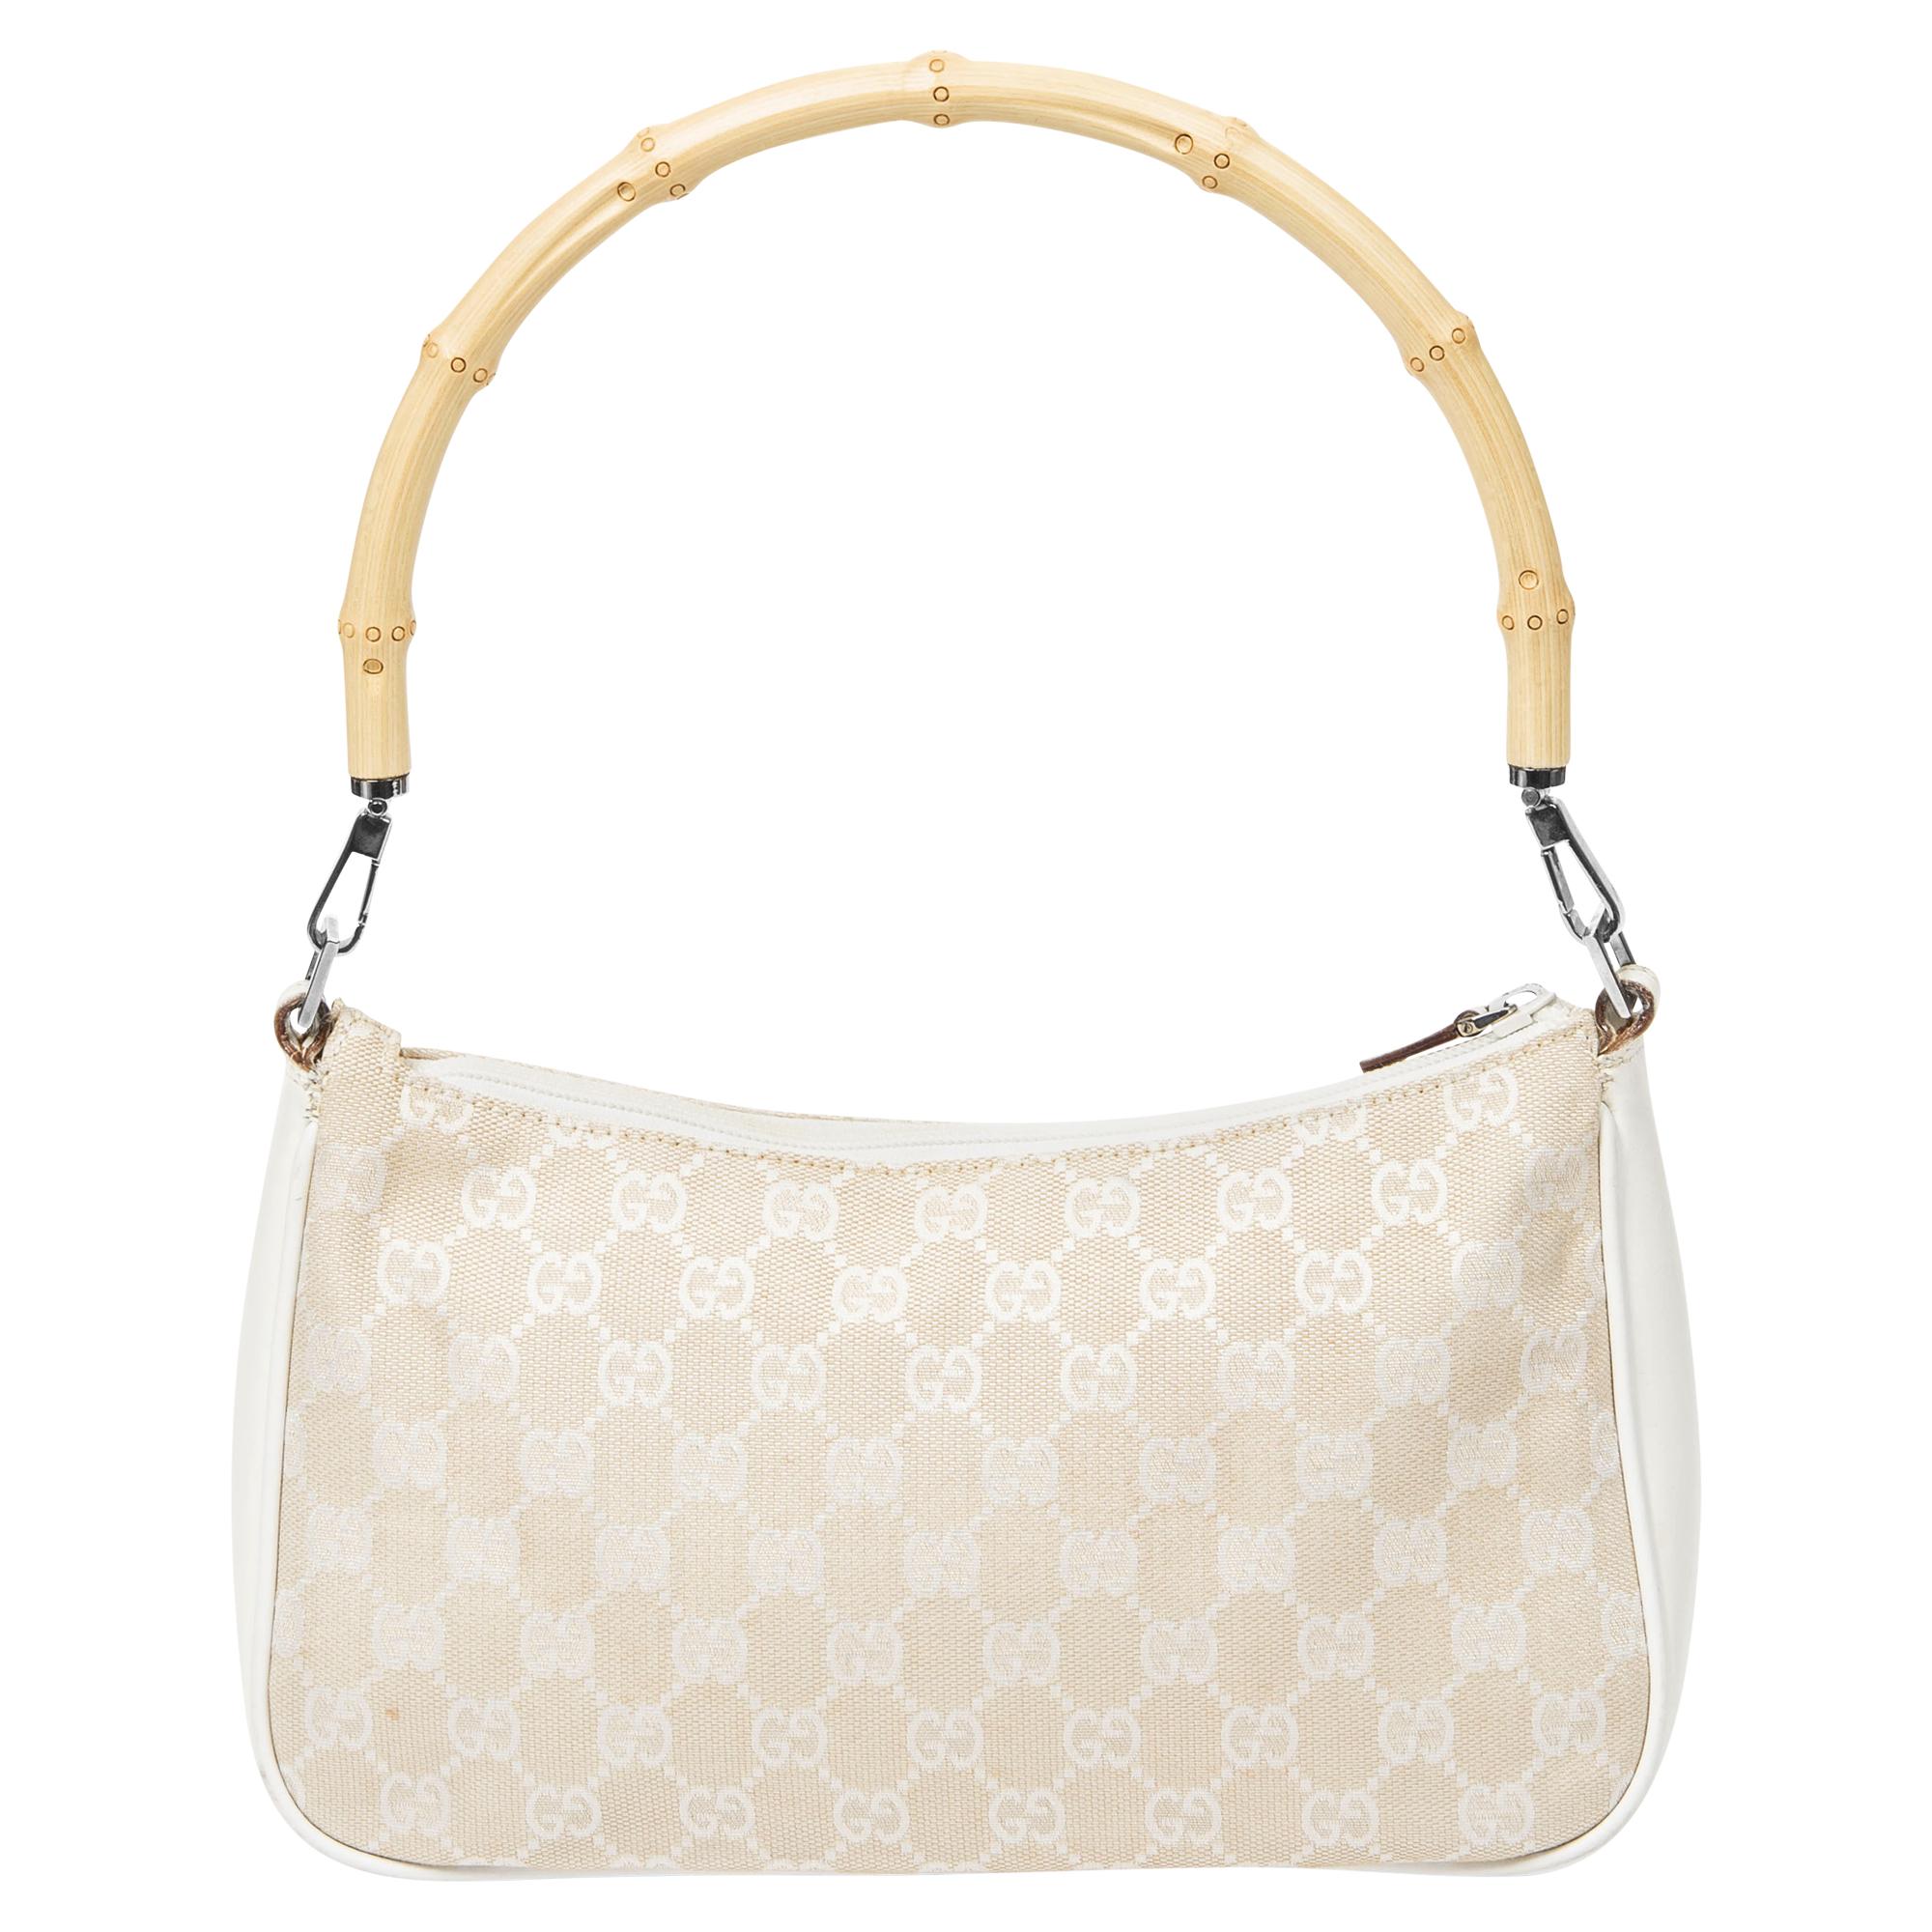 Gucci White/Beige GG Bamboo Shoulder Bag In Excellent Condition For Sale In Atlanta, GA